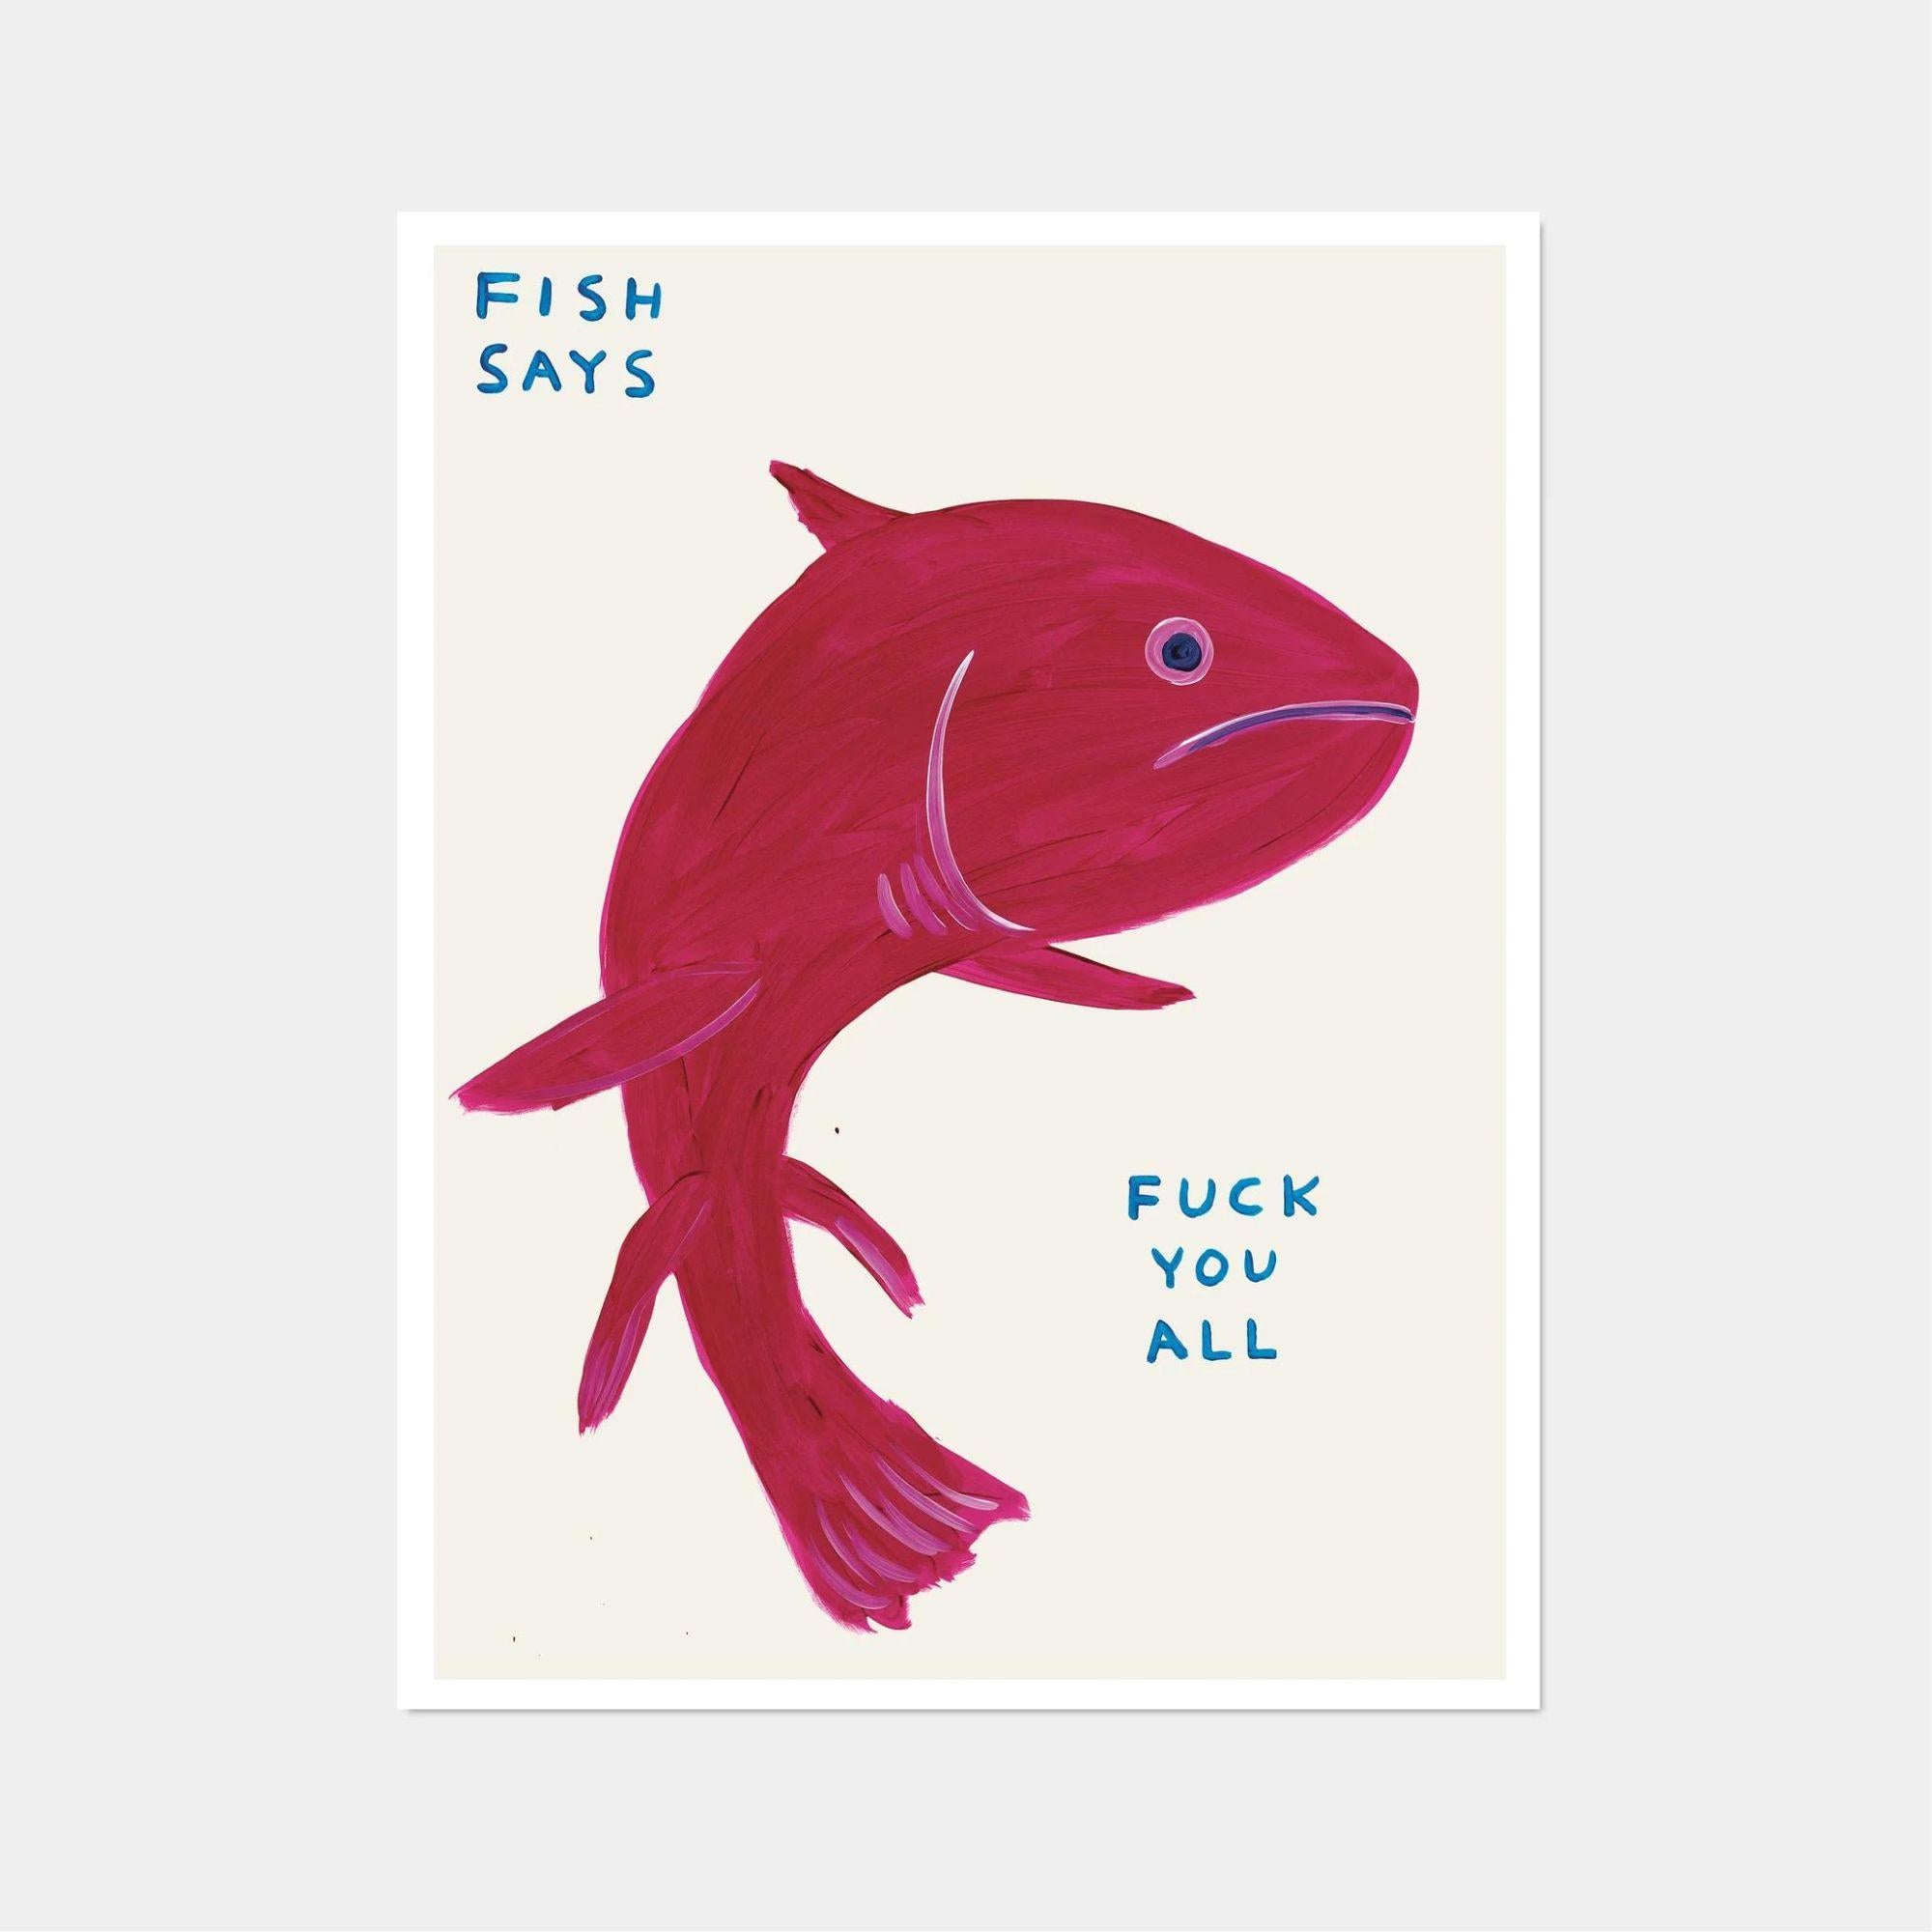 Fish Says Fuck You All - Print by David Shrigley